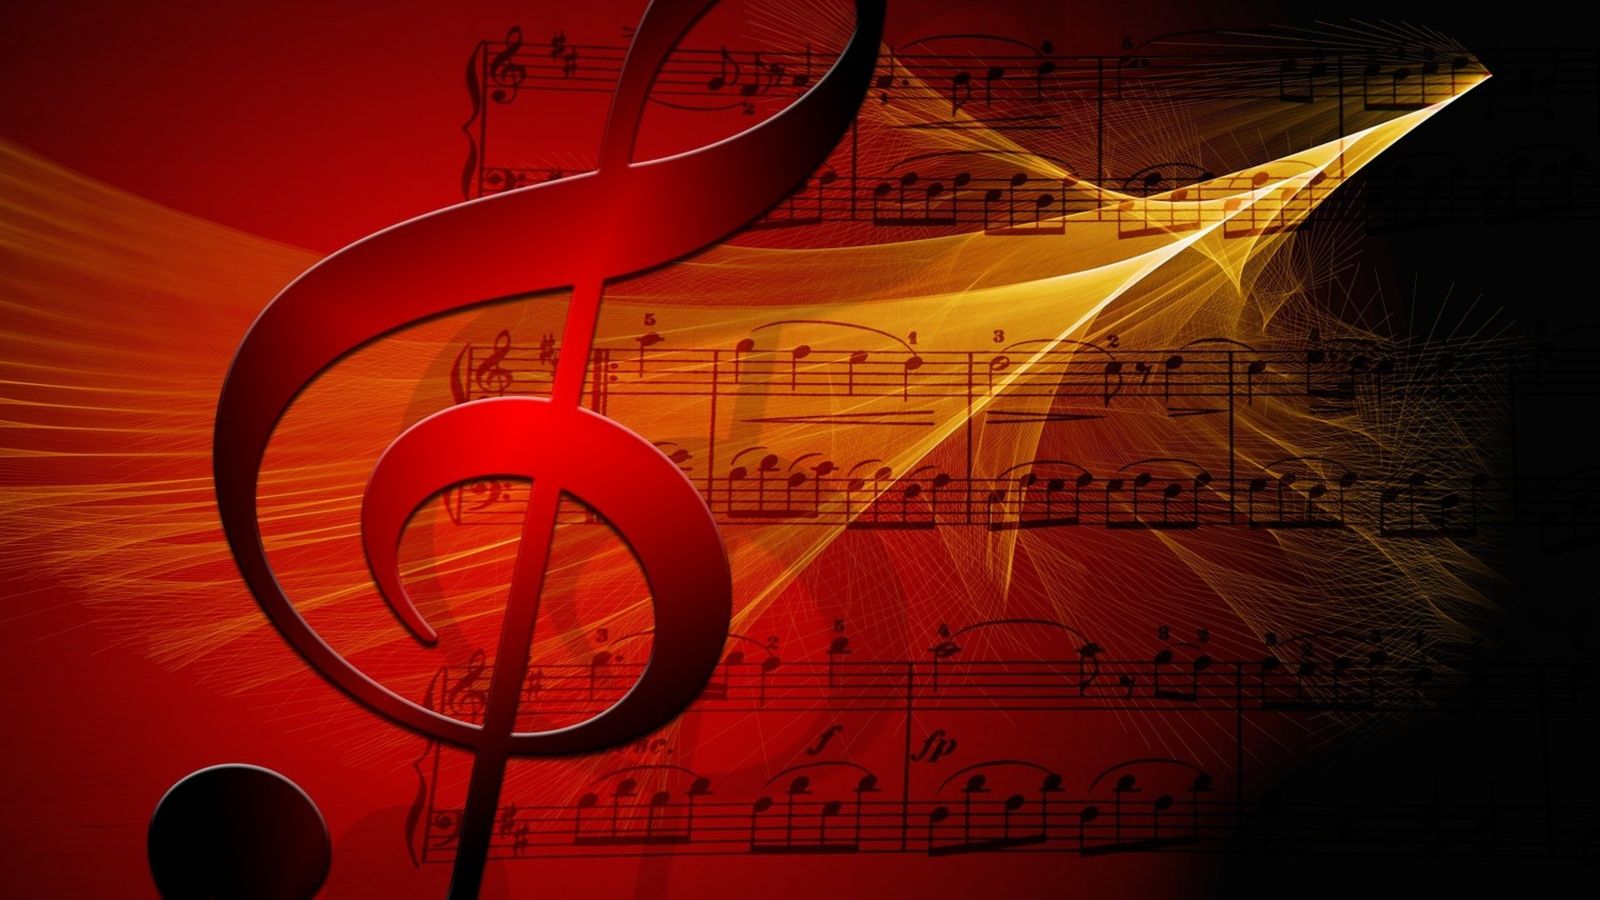 Large treble clef, sunburst colour red to black emanating from centre, superimposed over three lines of music score. Background colour is sunburst black to red, from right to left, with yellow-gold glowing fractal flame pattern growing out of the black, sweeping across the red.